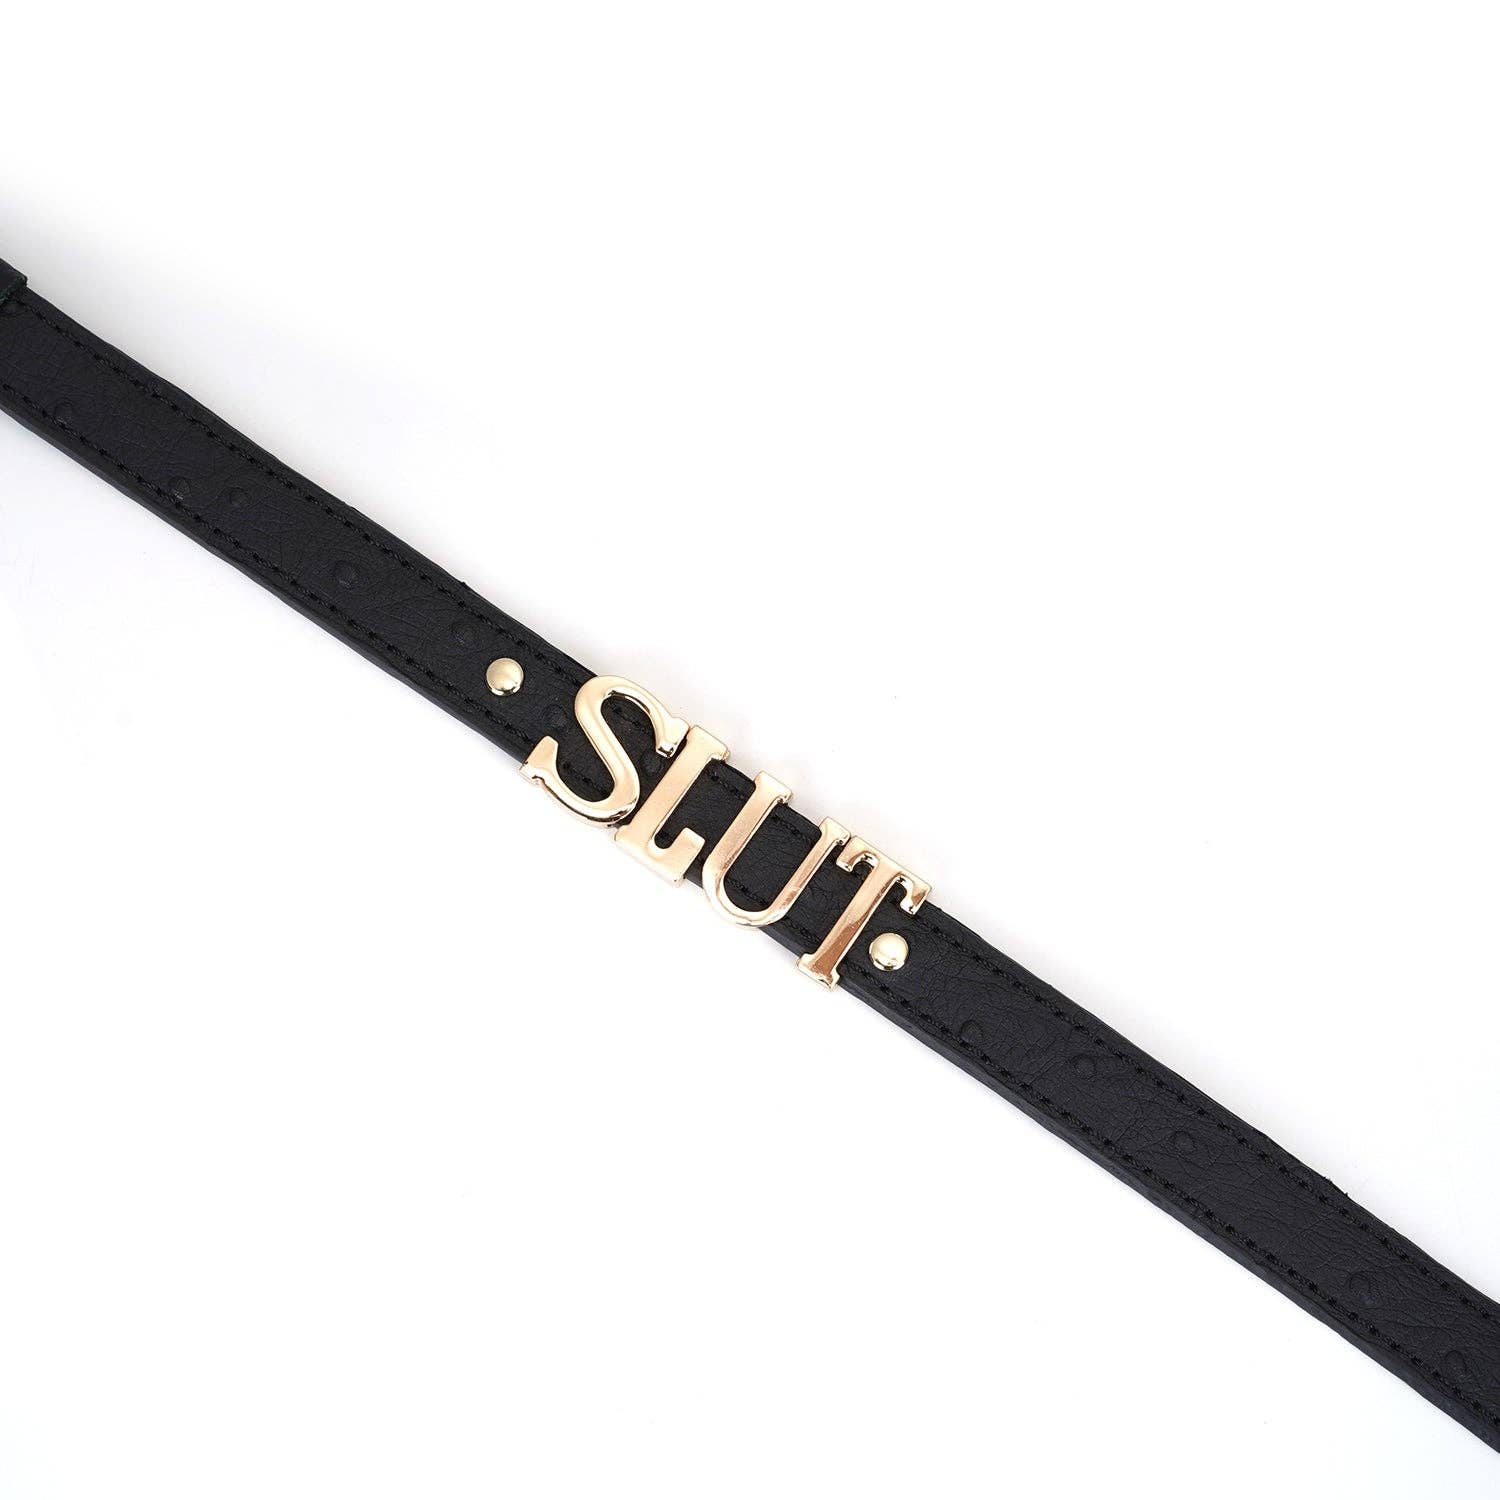  Demon's Kiss Black Leather Choker with Big Letters SLUT Kink by Liebe Seele- The Nookie